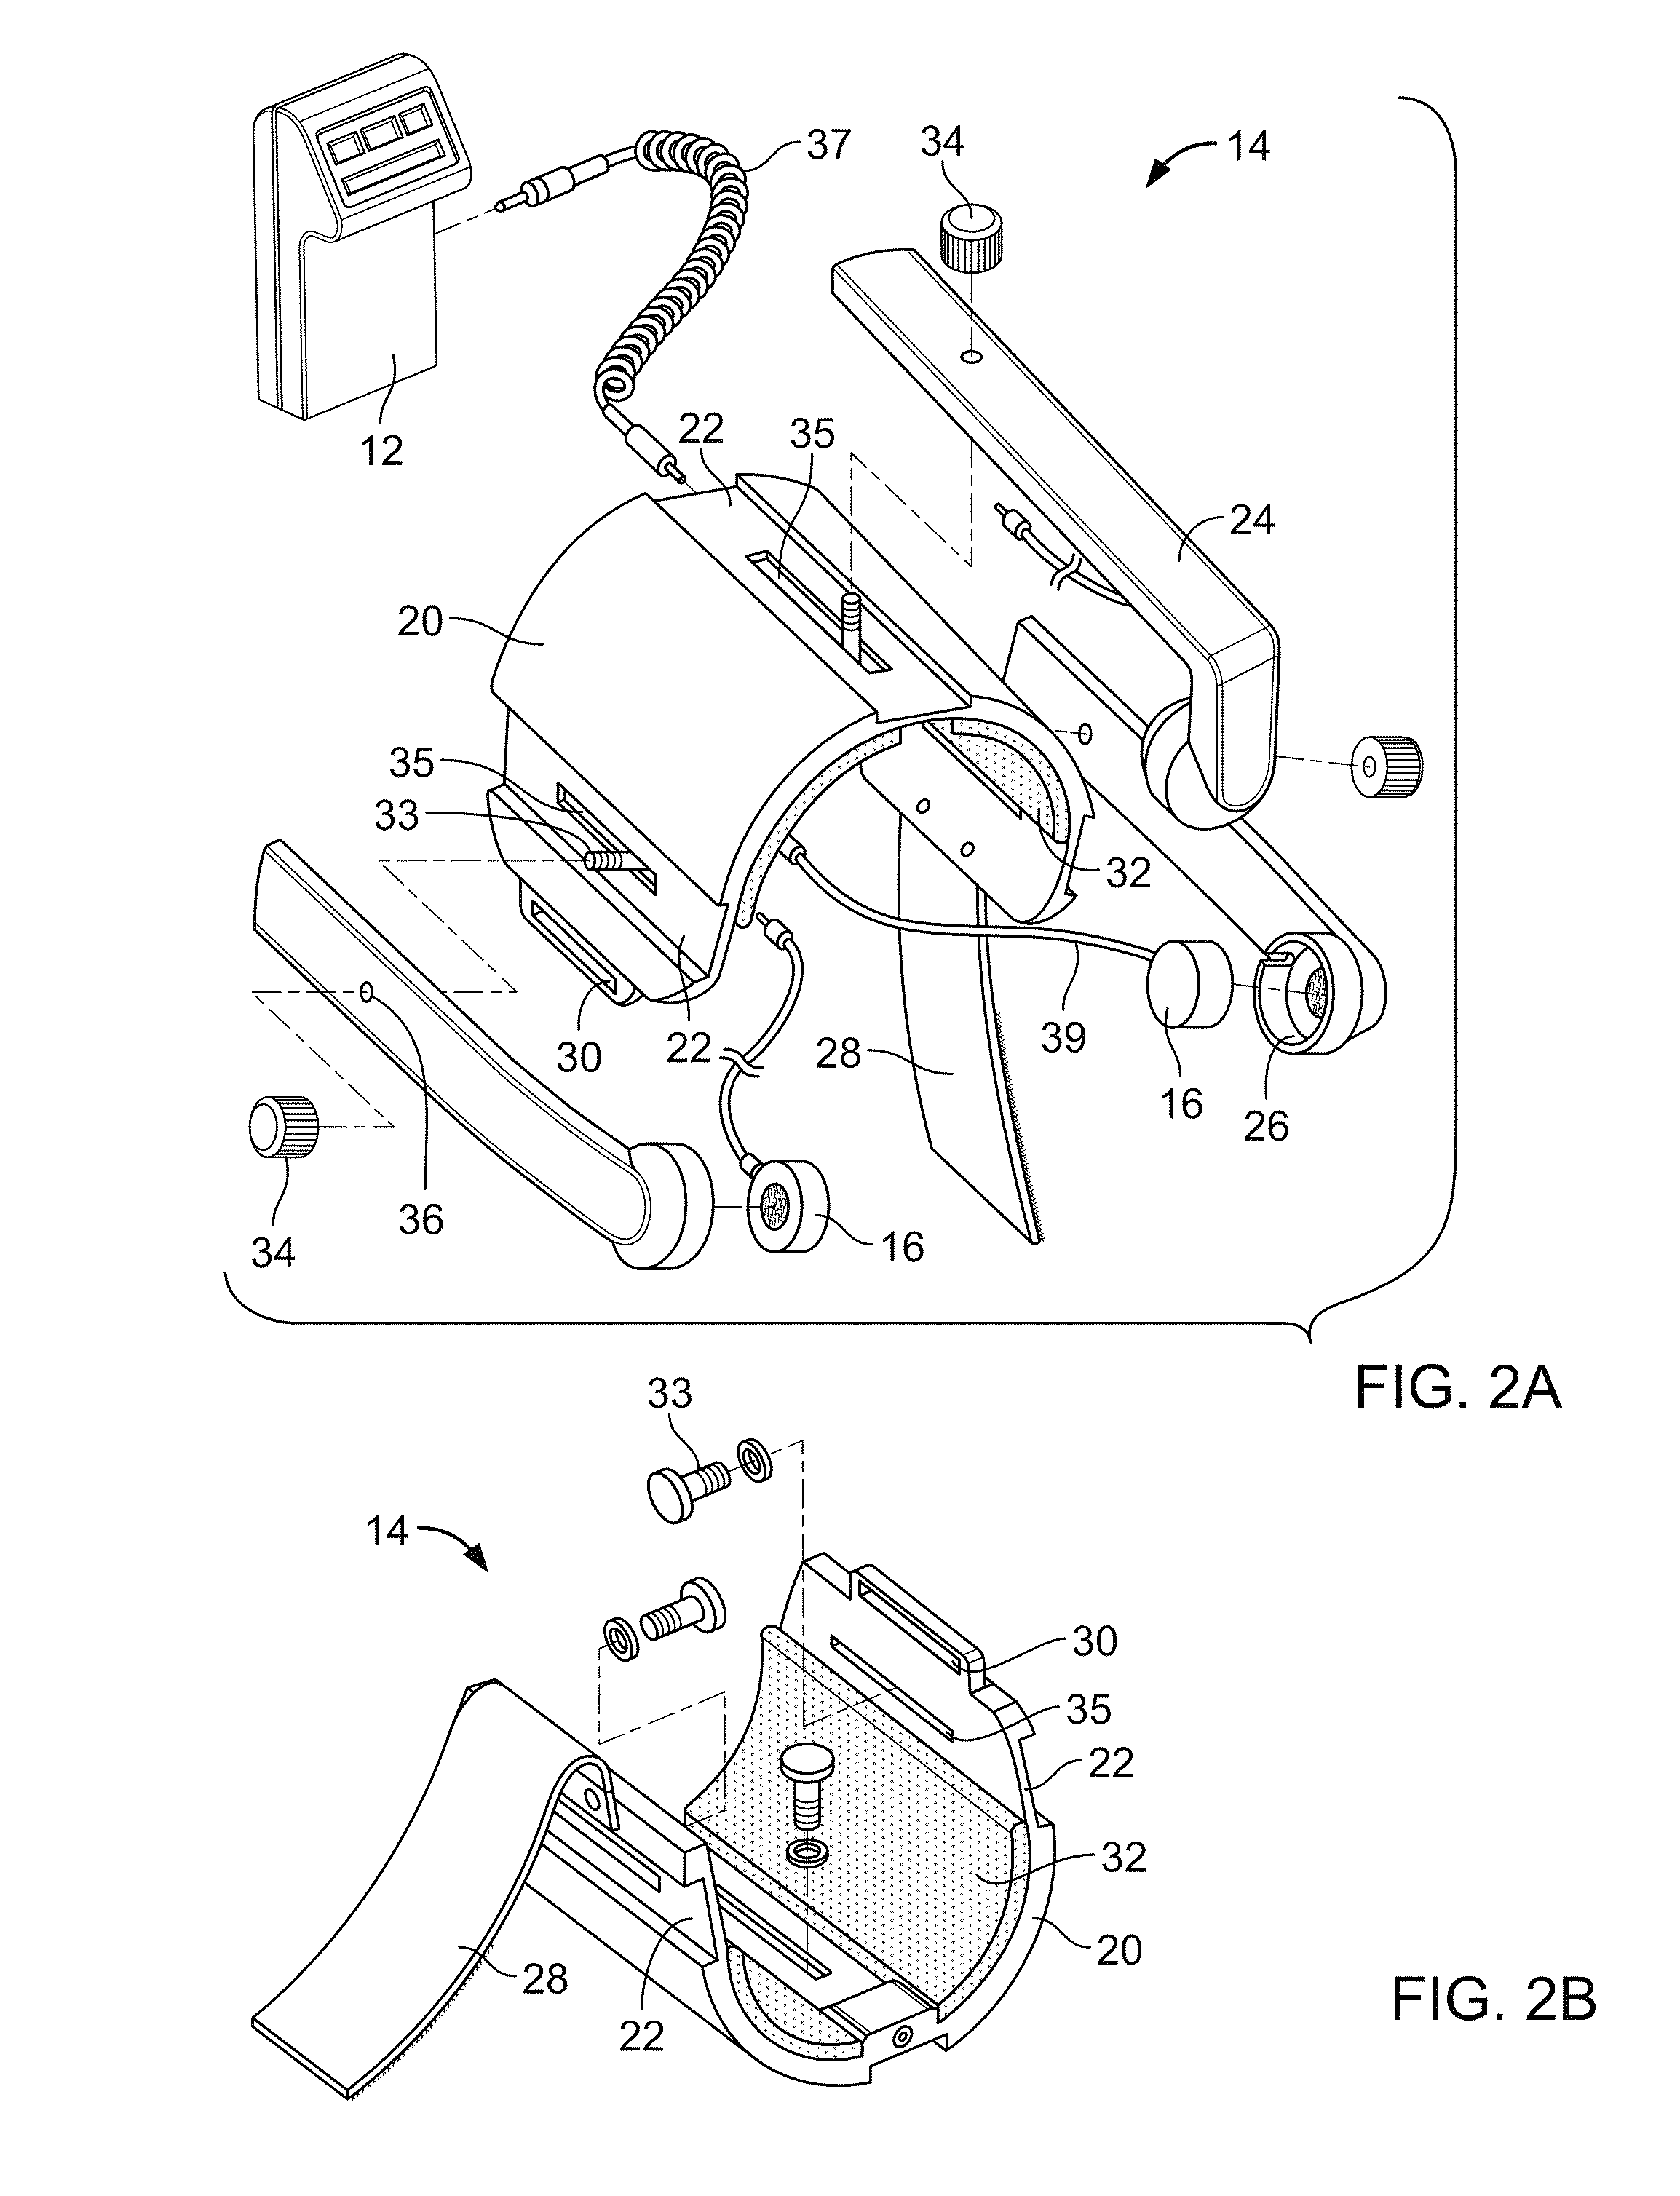 Method and apparatus for connective tissue treatment